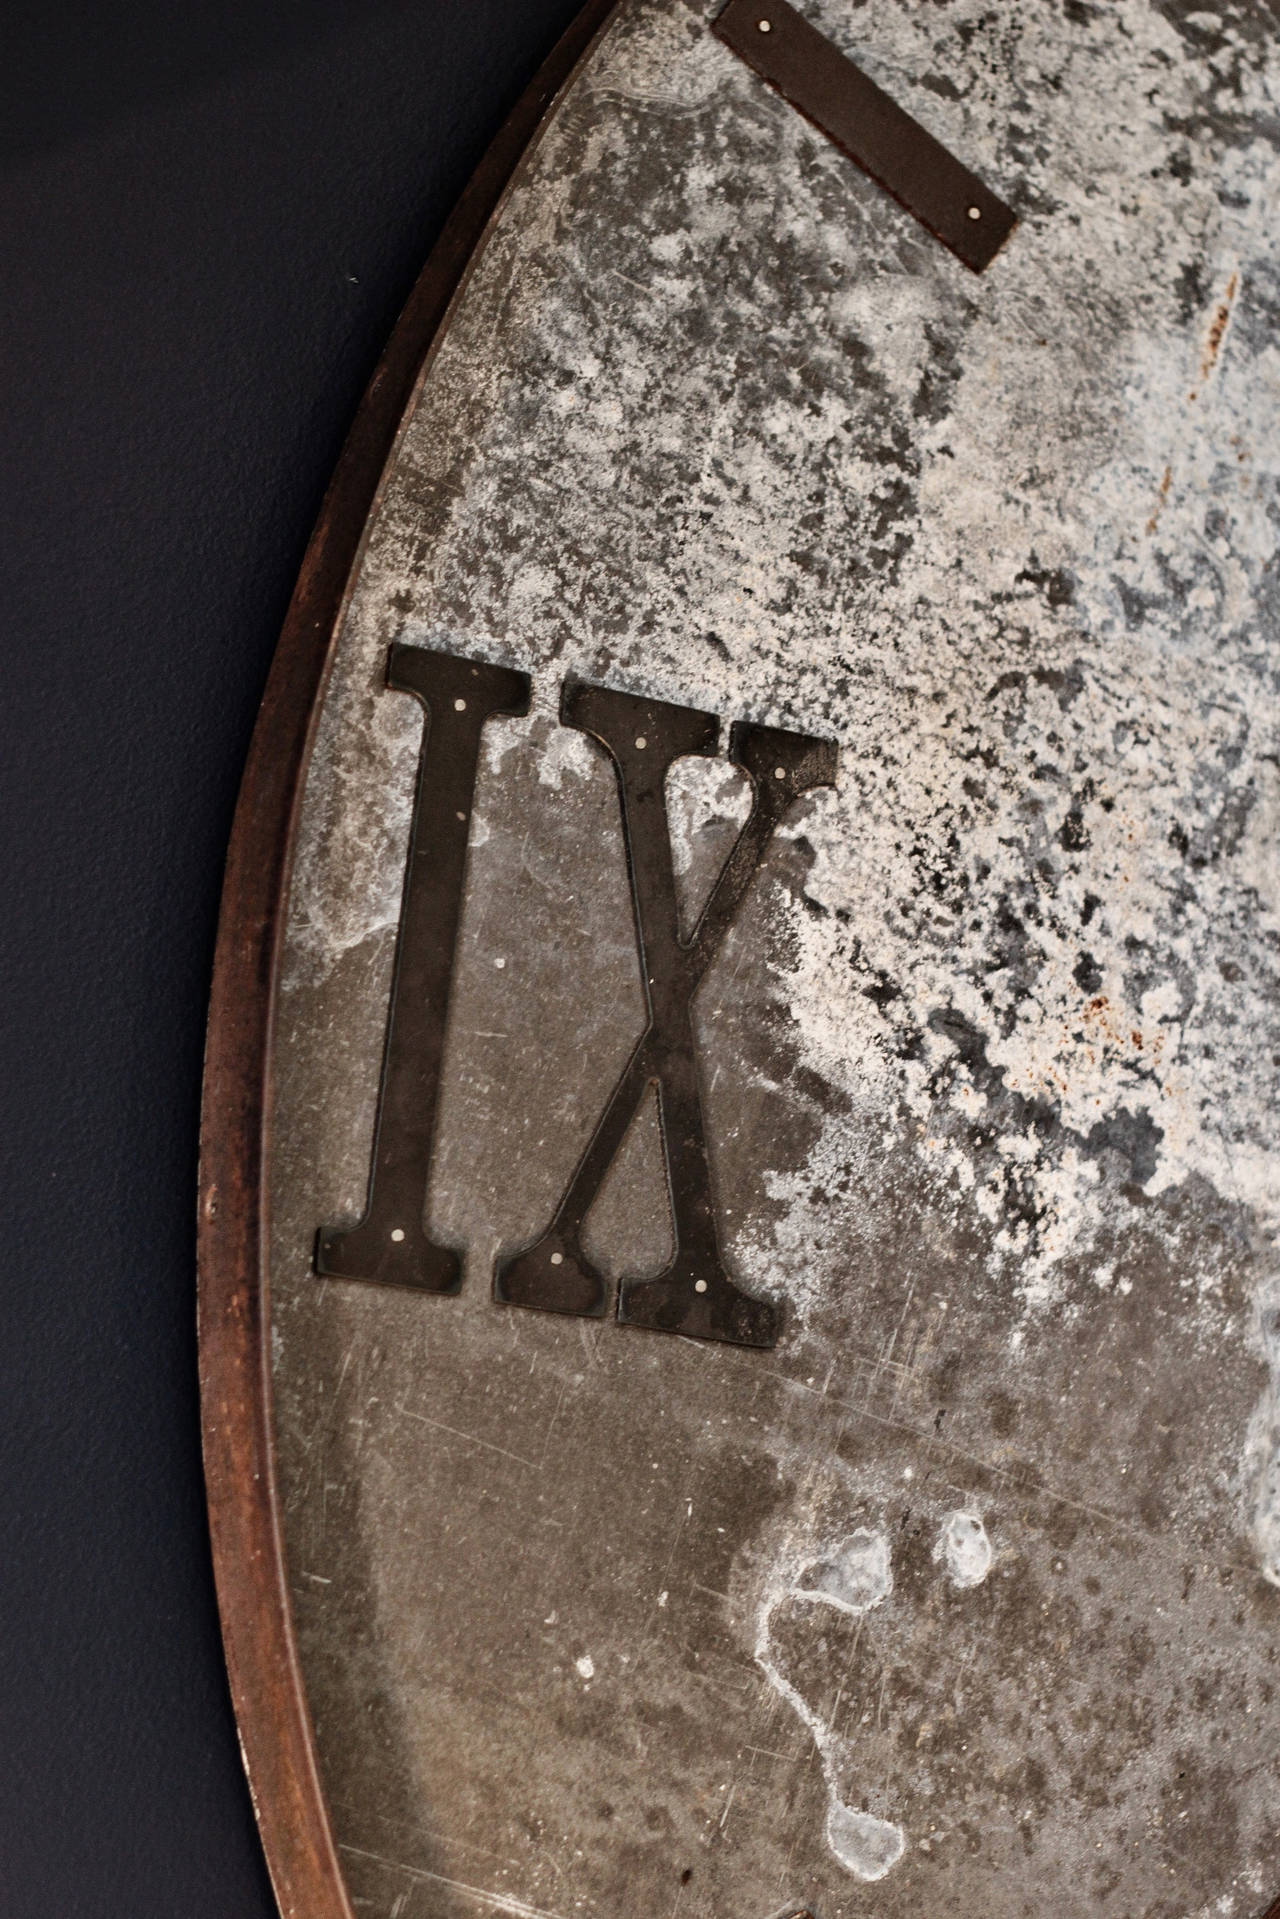 Zinc oxidized wooden clock with cast iron surround and cast iron hands and numbers.